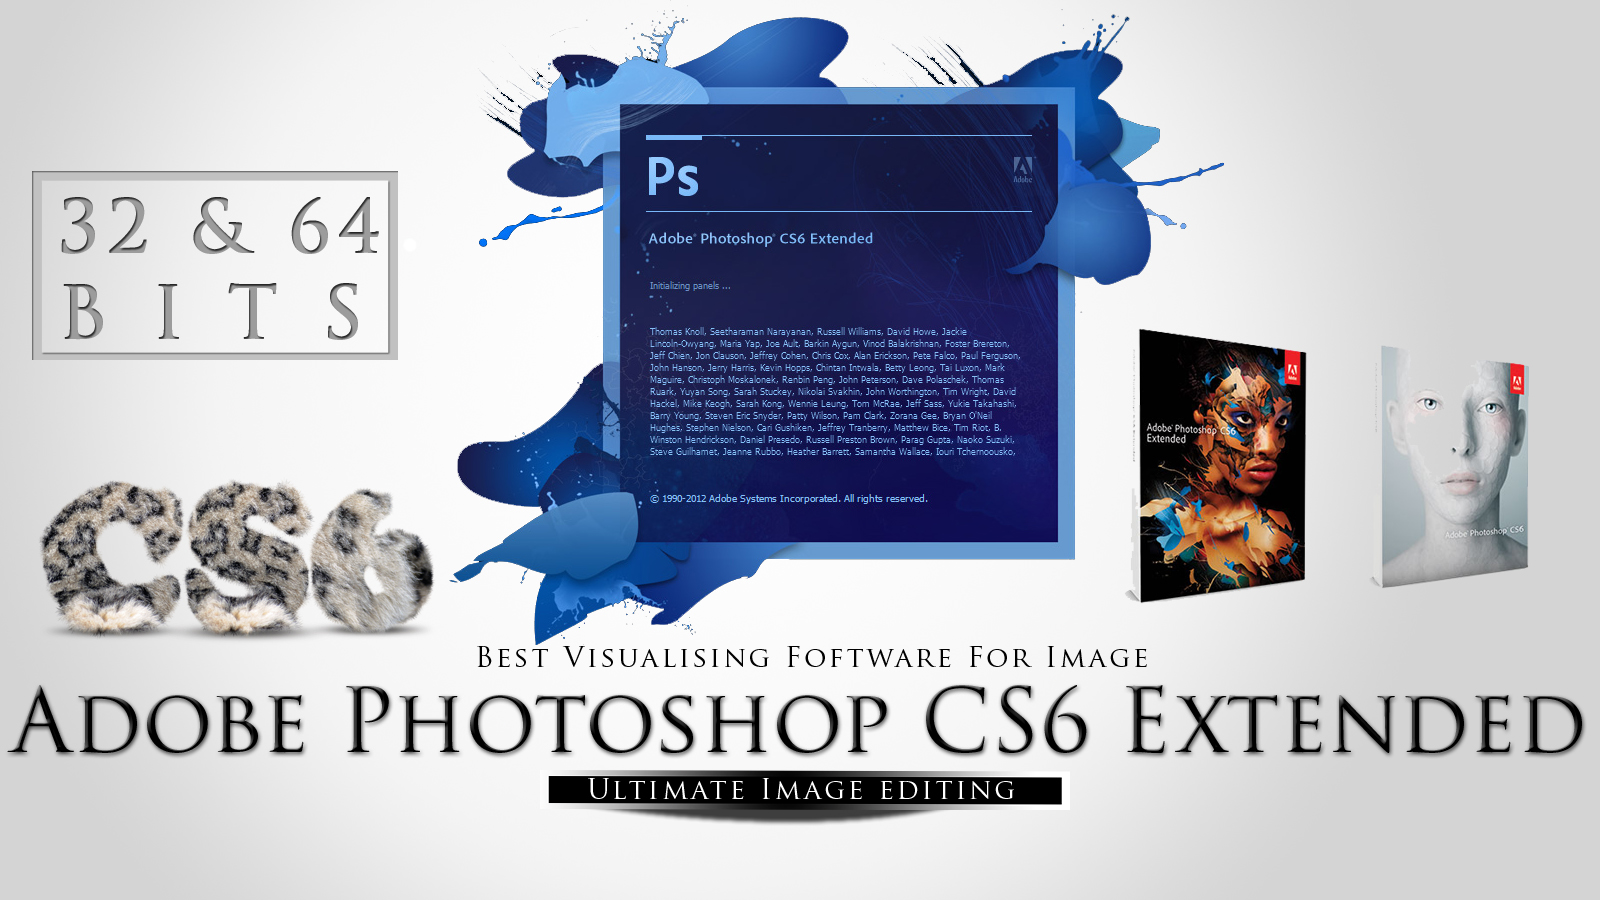 adobe photoshop cs6 extended 13.0 free download full version